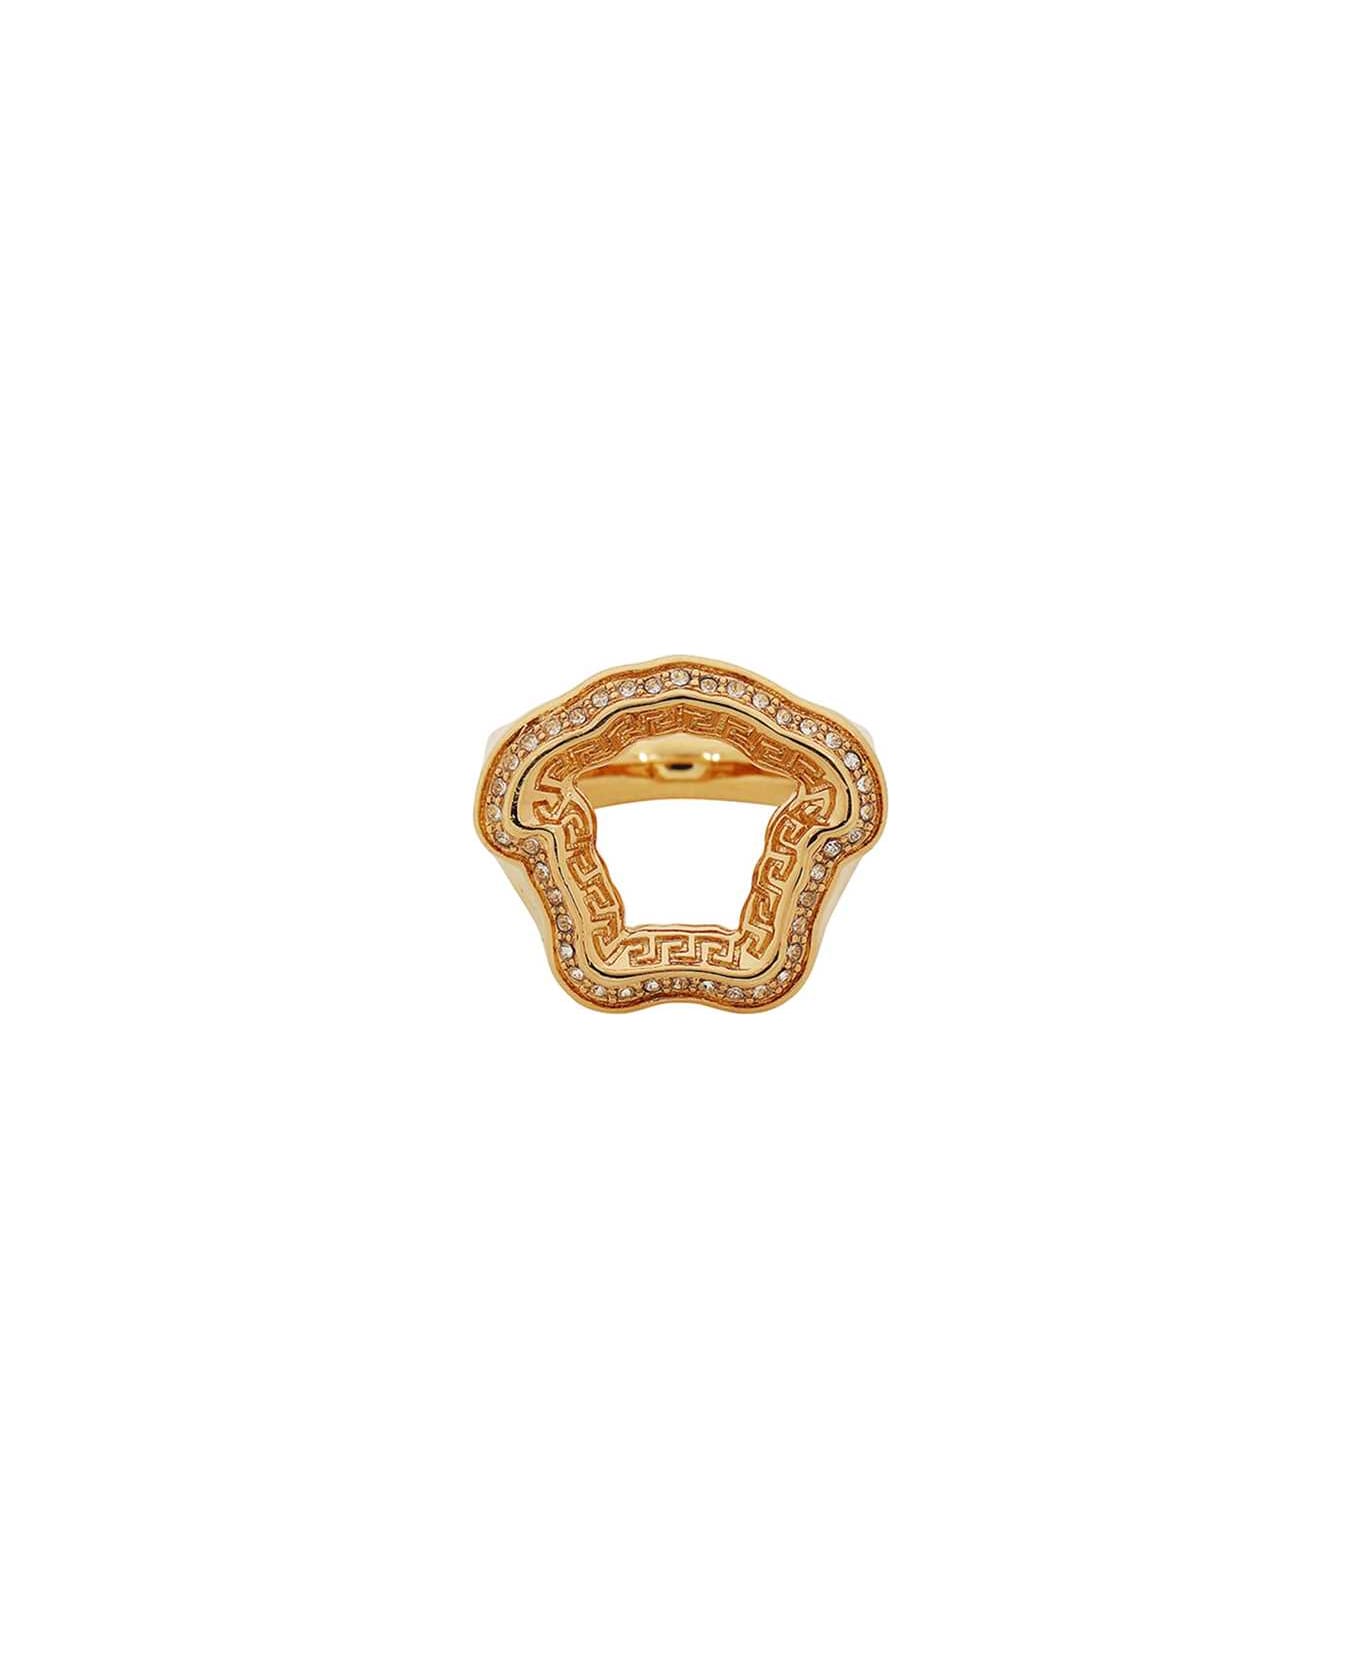 Versace Gold Plated Metal Ring - Gold リング